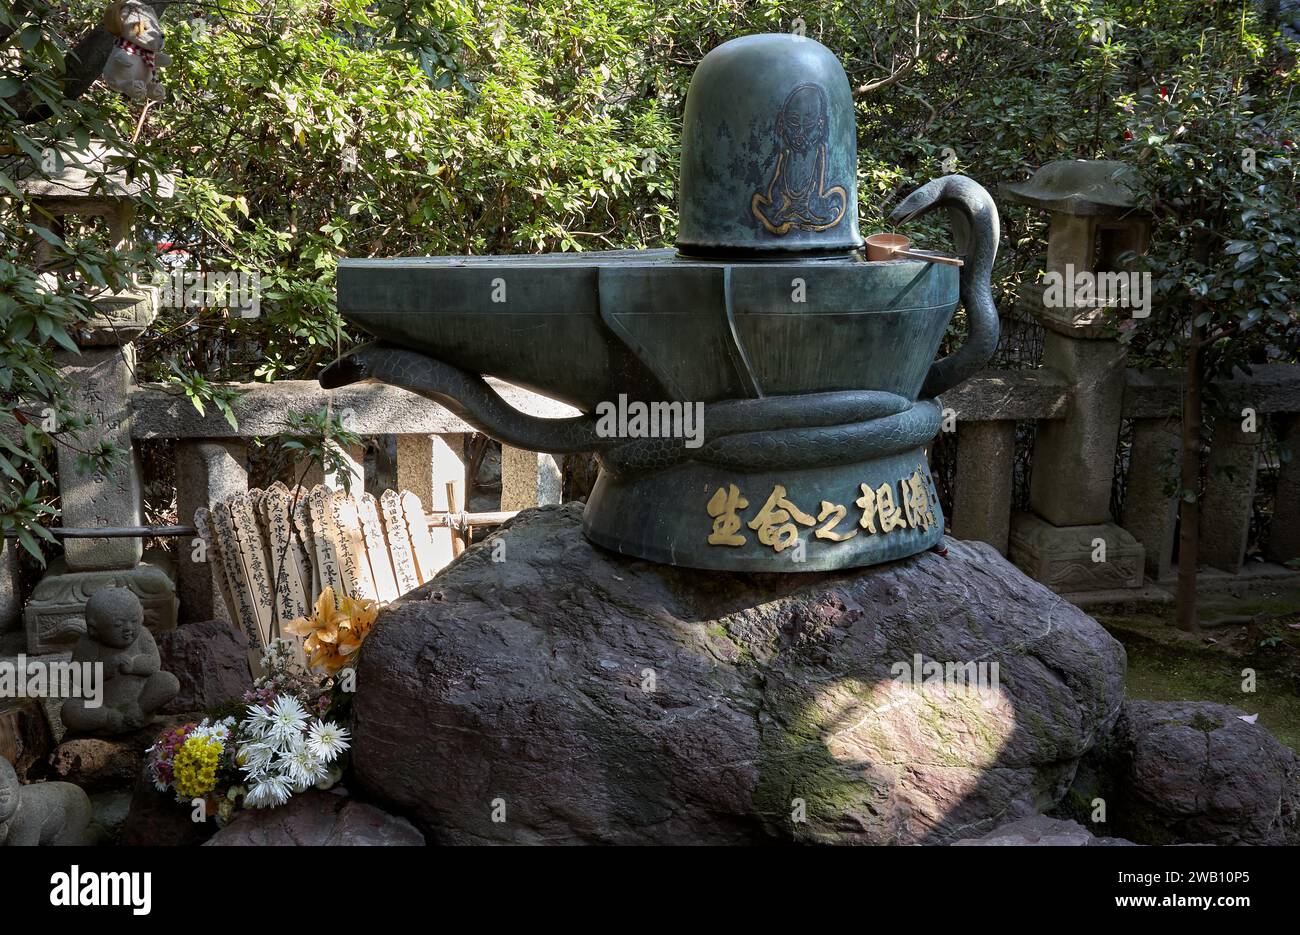 Nagoya, Japan - November 20, 2007: The bronze Shiva Linga in Toganji temple. The symbol of lingam-yoni, the union of the feminine and the masculine in Stock Photo